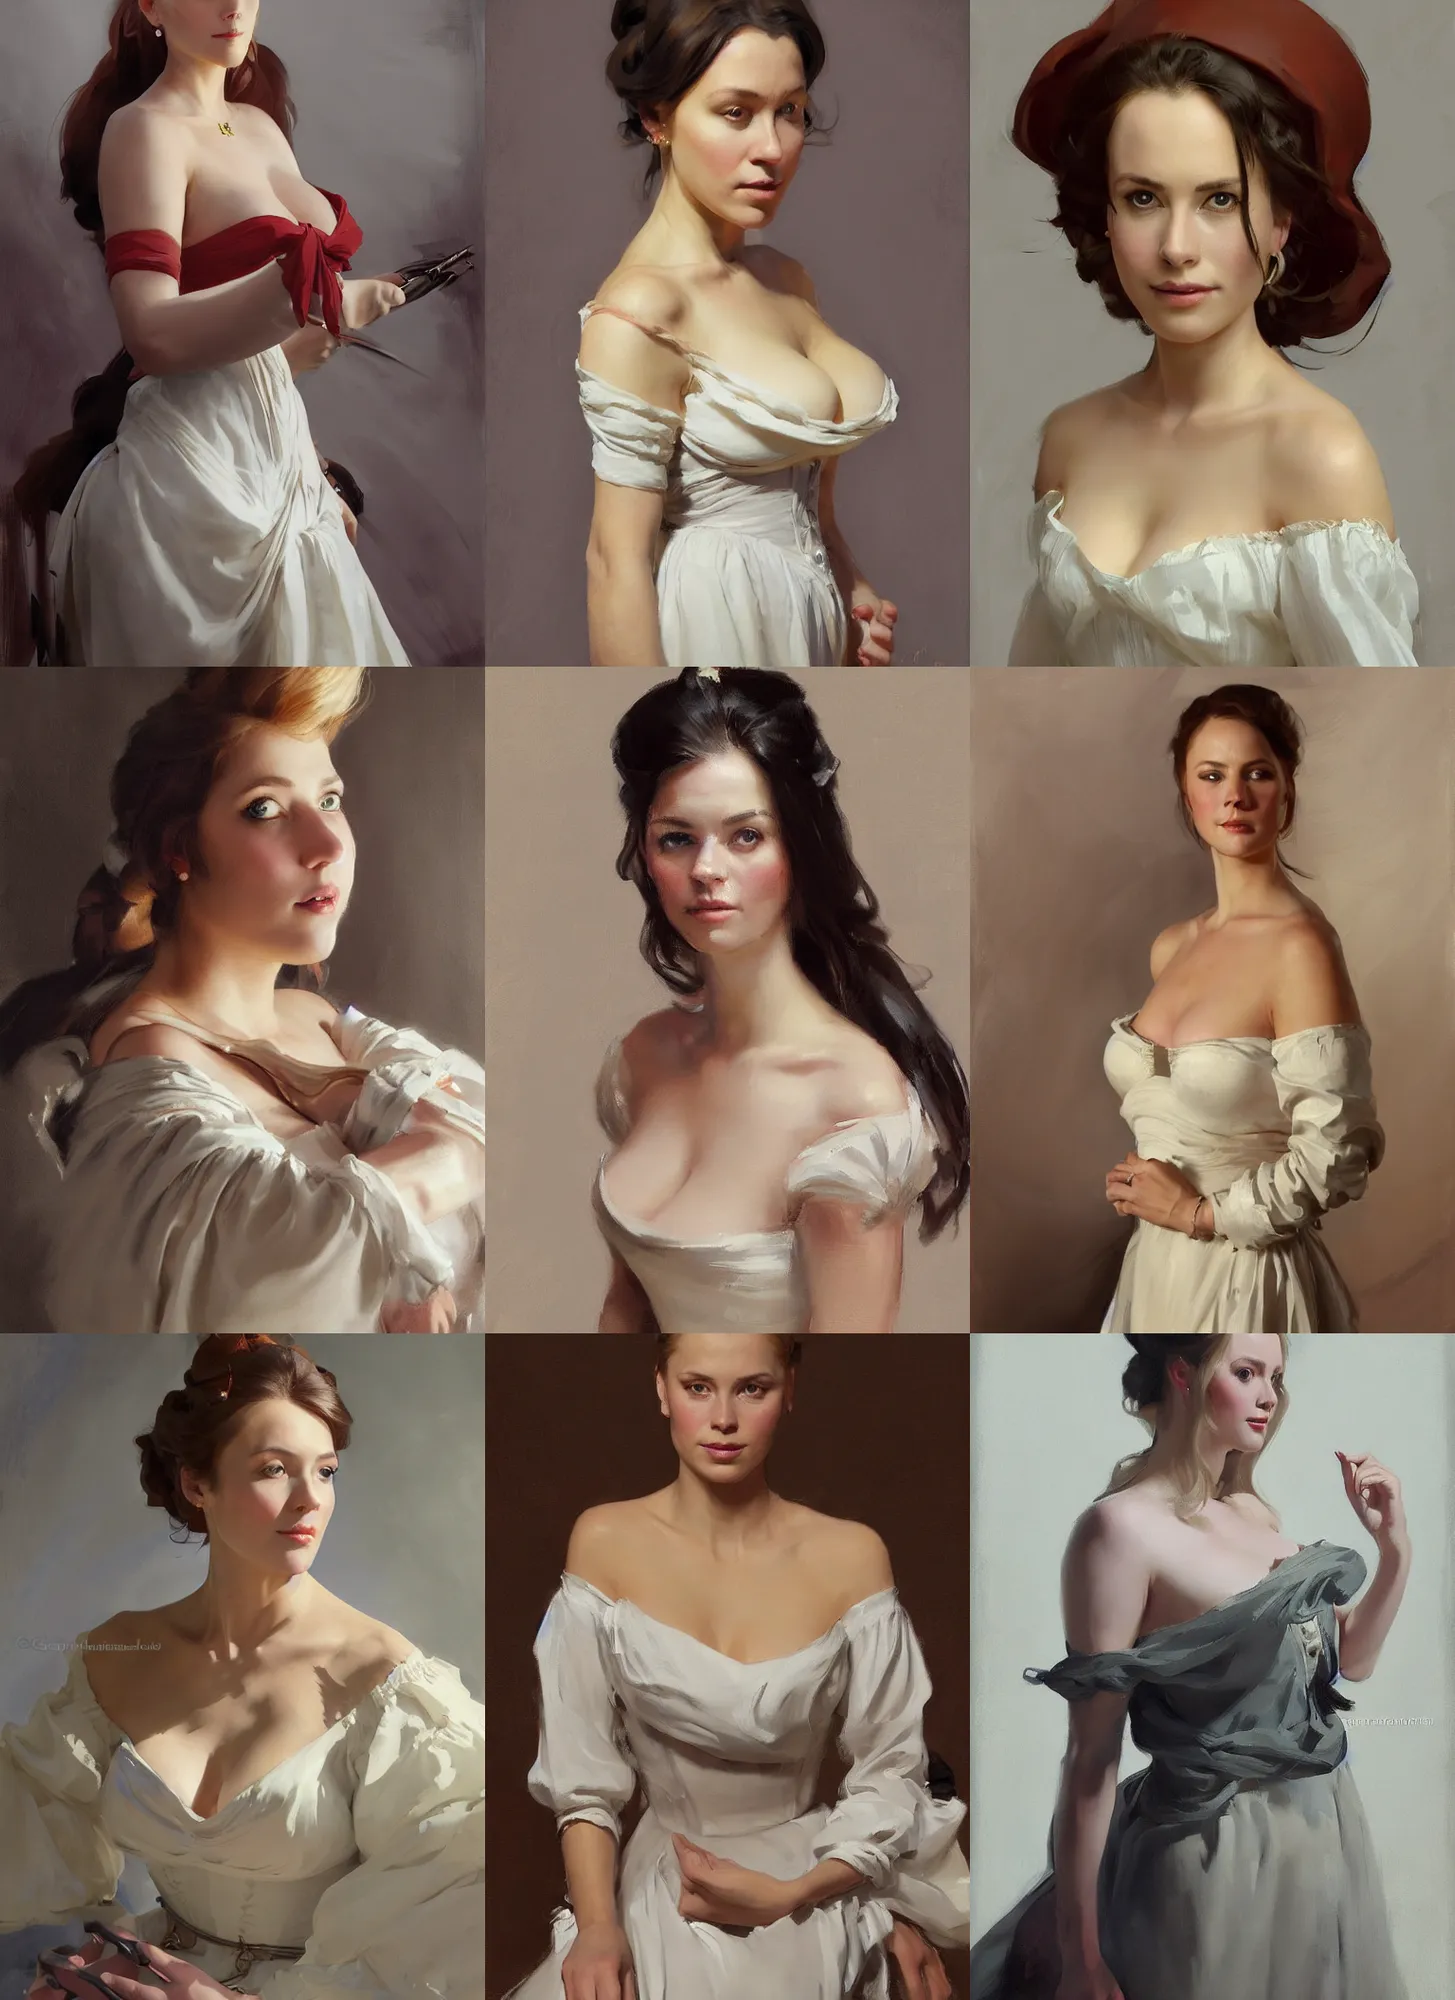 Prompt: portrait of a beautiful finnish norwegian swedish scandinavian attractive glamour model wearing 1 7 th century french off - the - shoulder neckline bodice with low neckline, jodhpurs greg manchess painting by sargent and leyendecker, studio ghibli fantasy medium shot asymmetrical intricate elegant matte painting illustration hearthstone, by greg rutkowski by greg tocchini by james gilleard